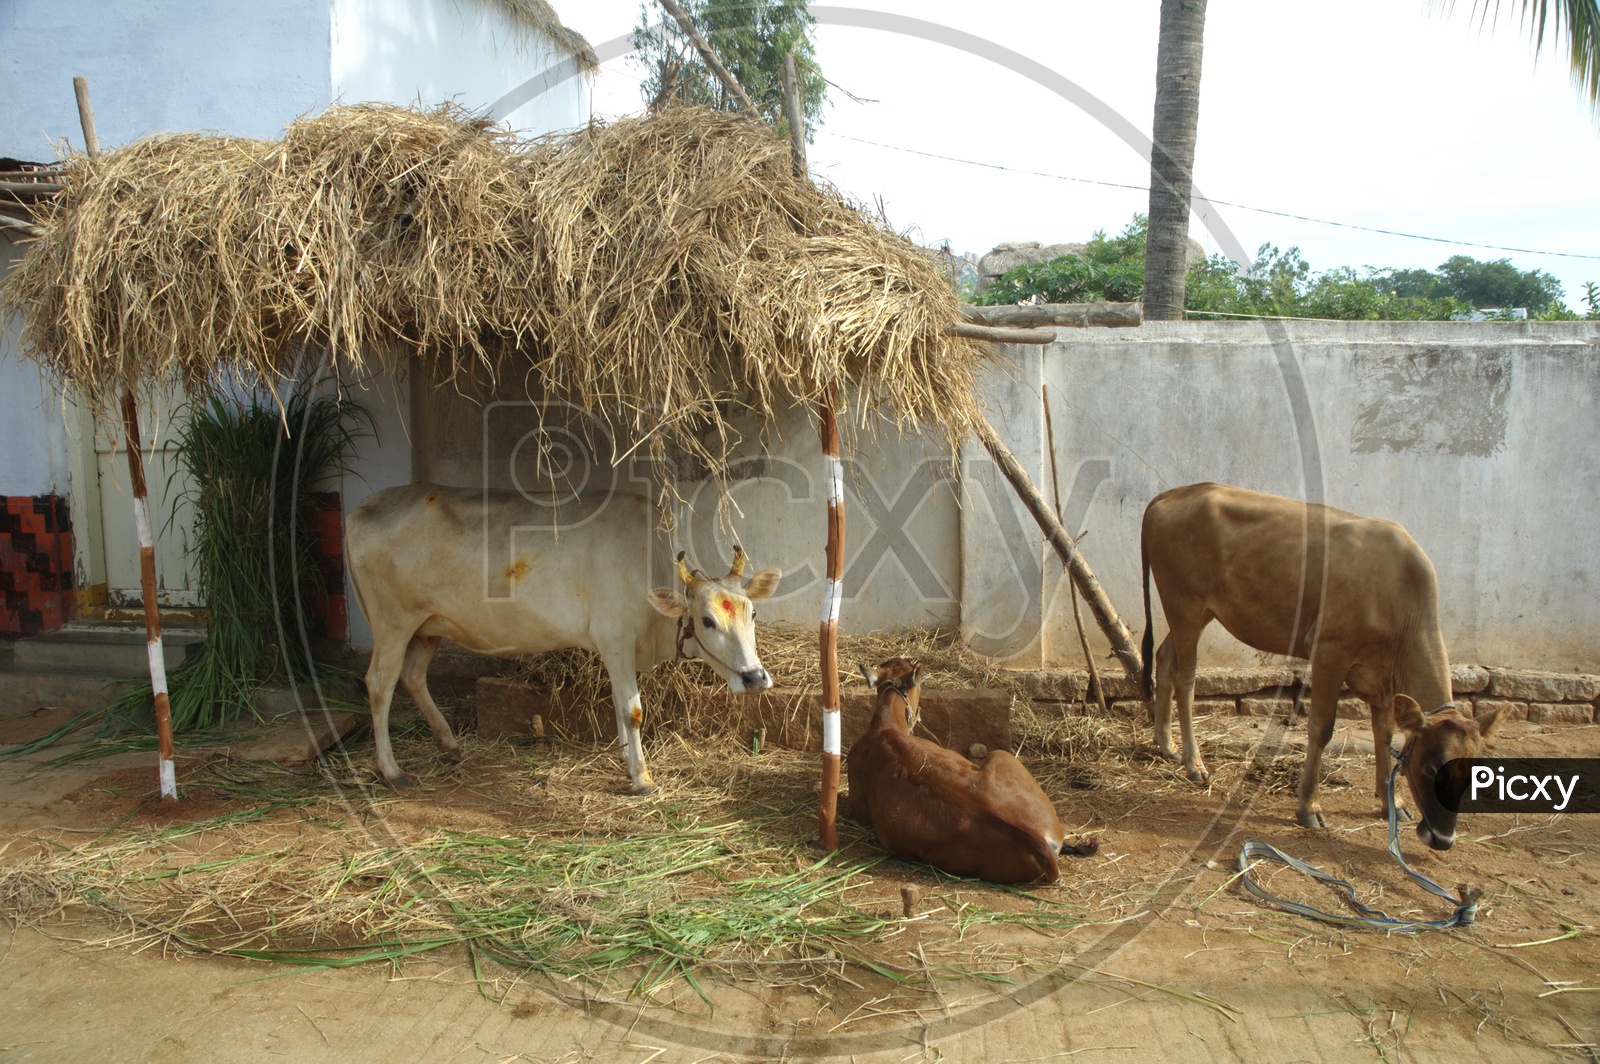 Cows at Rural area